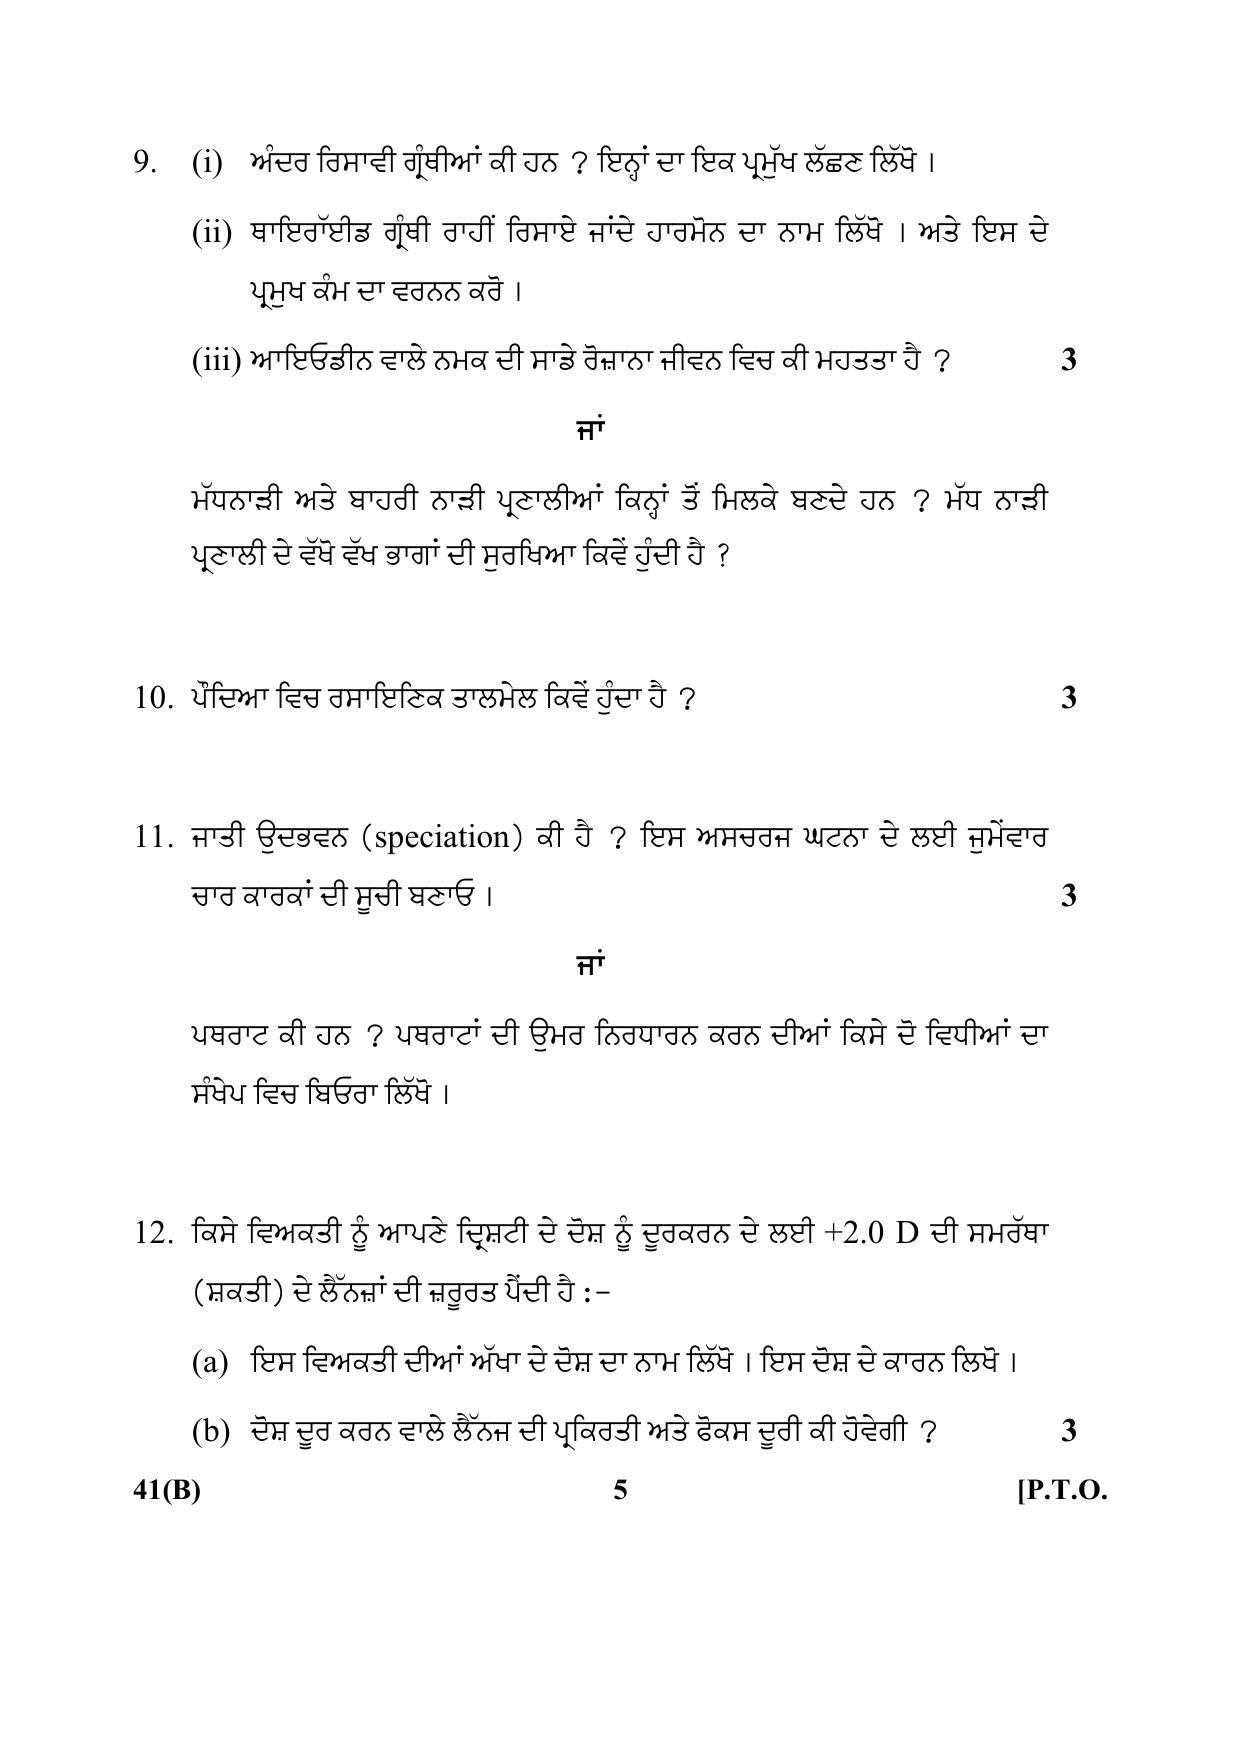 CBSE Class 10 41(B) (Science) For Blind_Punjabi 2018 Question Paper - Page 5